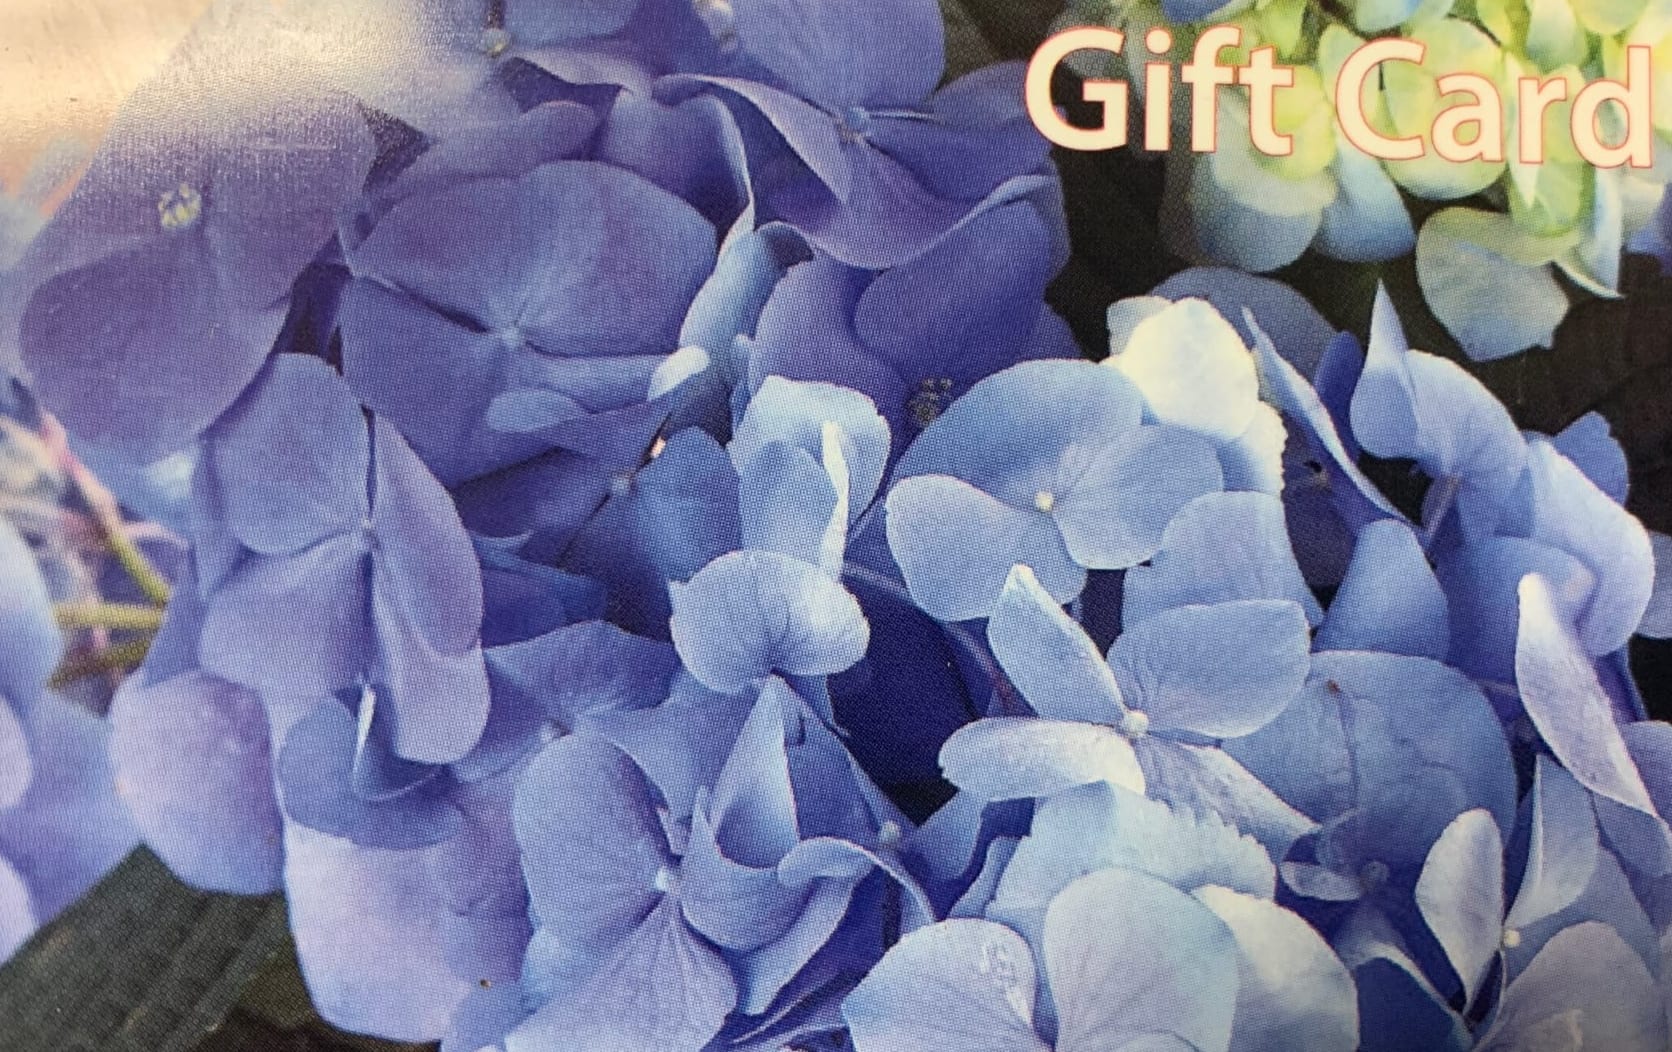 $75 Gift Card - Introducing the Exceptional Flowers &amp; Gifts $75 Gift Card, the perfect gift for anyone who appreciates the finest in floral arrangements, artisan chocolates, balloons, teddy bears, or handmade soaps. This versatile gift card can be used for pick-up or delivery of exceptional products within our local area, including Boca Raton, Delray Beach, Deerfield Beach, Boynton Beach, and Highland Beach.  With the Exceptional Flowers &amp; Gifts $75 Gift Card, your recipient will have the opportunity to indulge in the beauty and fragrance of our exquisite flower arrangements. Our skilled florists create stunning arrangements using the highest quality blooms, ensuring that each bouquet is a work of art that brings joy and delight to its recipient. From classic roses to vibrant mixed arrangements, there is something for every taste and occasion.  For those with a sweet tooth, our artisan chocolates are a true delight. Made with the finest ingredients and crafted with exceptional skill, these chocolates offer a decadent experience and will delight the senses. Whether it's a box of assorted chocolates, chocolate-covered strawberries, or a custom-made chocolate creation, our selection is sure to satisfy even the most discerning chocolate lover.  Balloons add a touch of fun and celebration to any occasion, and our collection of balloons is sure to bring a smile to anyone's face. From cheerful and colorful designs to elegant and glamorous options, there is a balloon for every celebration. Let your loved one bask in the joy and excitement that balloons bring with our diverse selection.  Our collection of soft and cuddly teddy bears is perfect for those who appreciate a heartfelt and adorable gift. Whether for a child or a loved one, these plush companions are sure to bring comfort and warmth. From classic bears to whimsical characters, each teddy bear is made with the utmost care and attention to detail.  Handmade soaps provide a luxurious and pampering experience. Our selection of artisan soaps is crafted with natural ingredients, nourishing the skin and leaving it feeling soft and supple. The enticing scents and beautiful designs make these soaps a treat for the senses, creating a spa-like experience in the comfort of one's own home.  With the Exceptional Flowers &amp; Gifts $75 Gift Card, you can be confident that your recipient will be able to choose the perfect gift to suit their preferences. Whether they opt for a stunning floral arrangement, delectable chocolates, festive balloons, adorable teddy bears, or indulgent handmade soaps, their gift will be a reflection of your thoughtfulness and generosity.  Present your loved one with the Exceptional Flowers &amp; Gifts $75 Gift Card and let them discover the joy of choosing their own exceptional gift. Whether for a special occasion or just to brighten someone's day, this gift card is the gateway to a world of beauty, joy, and heartfelt surprises.